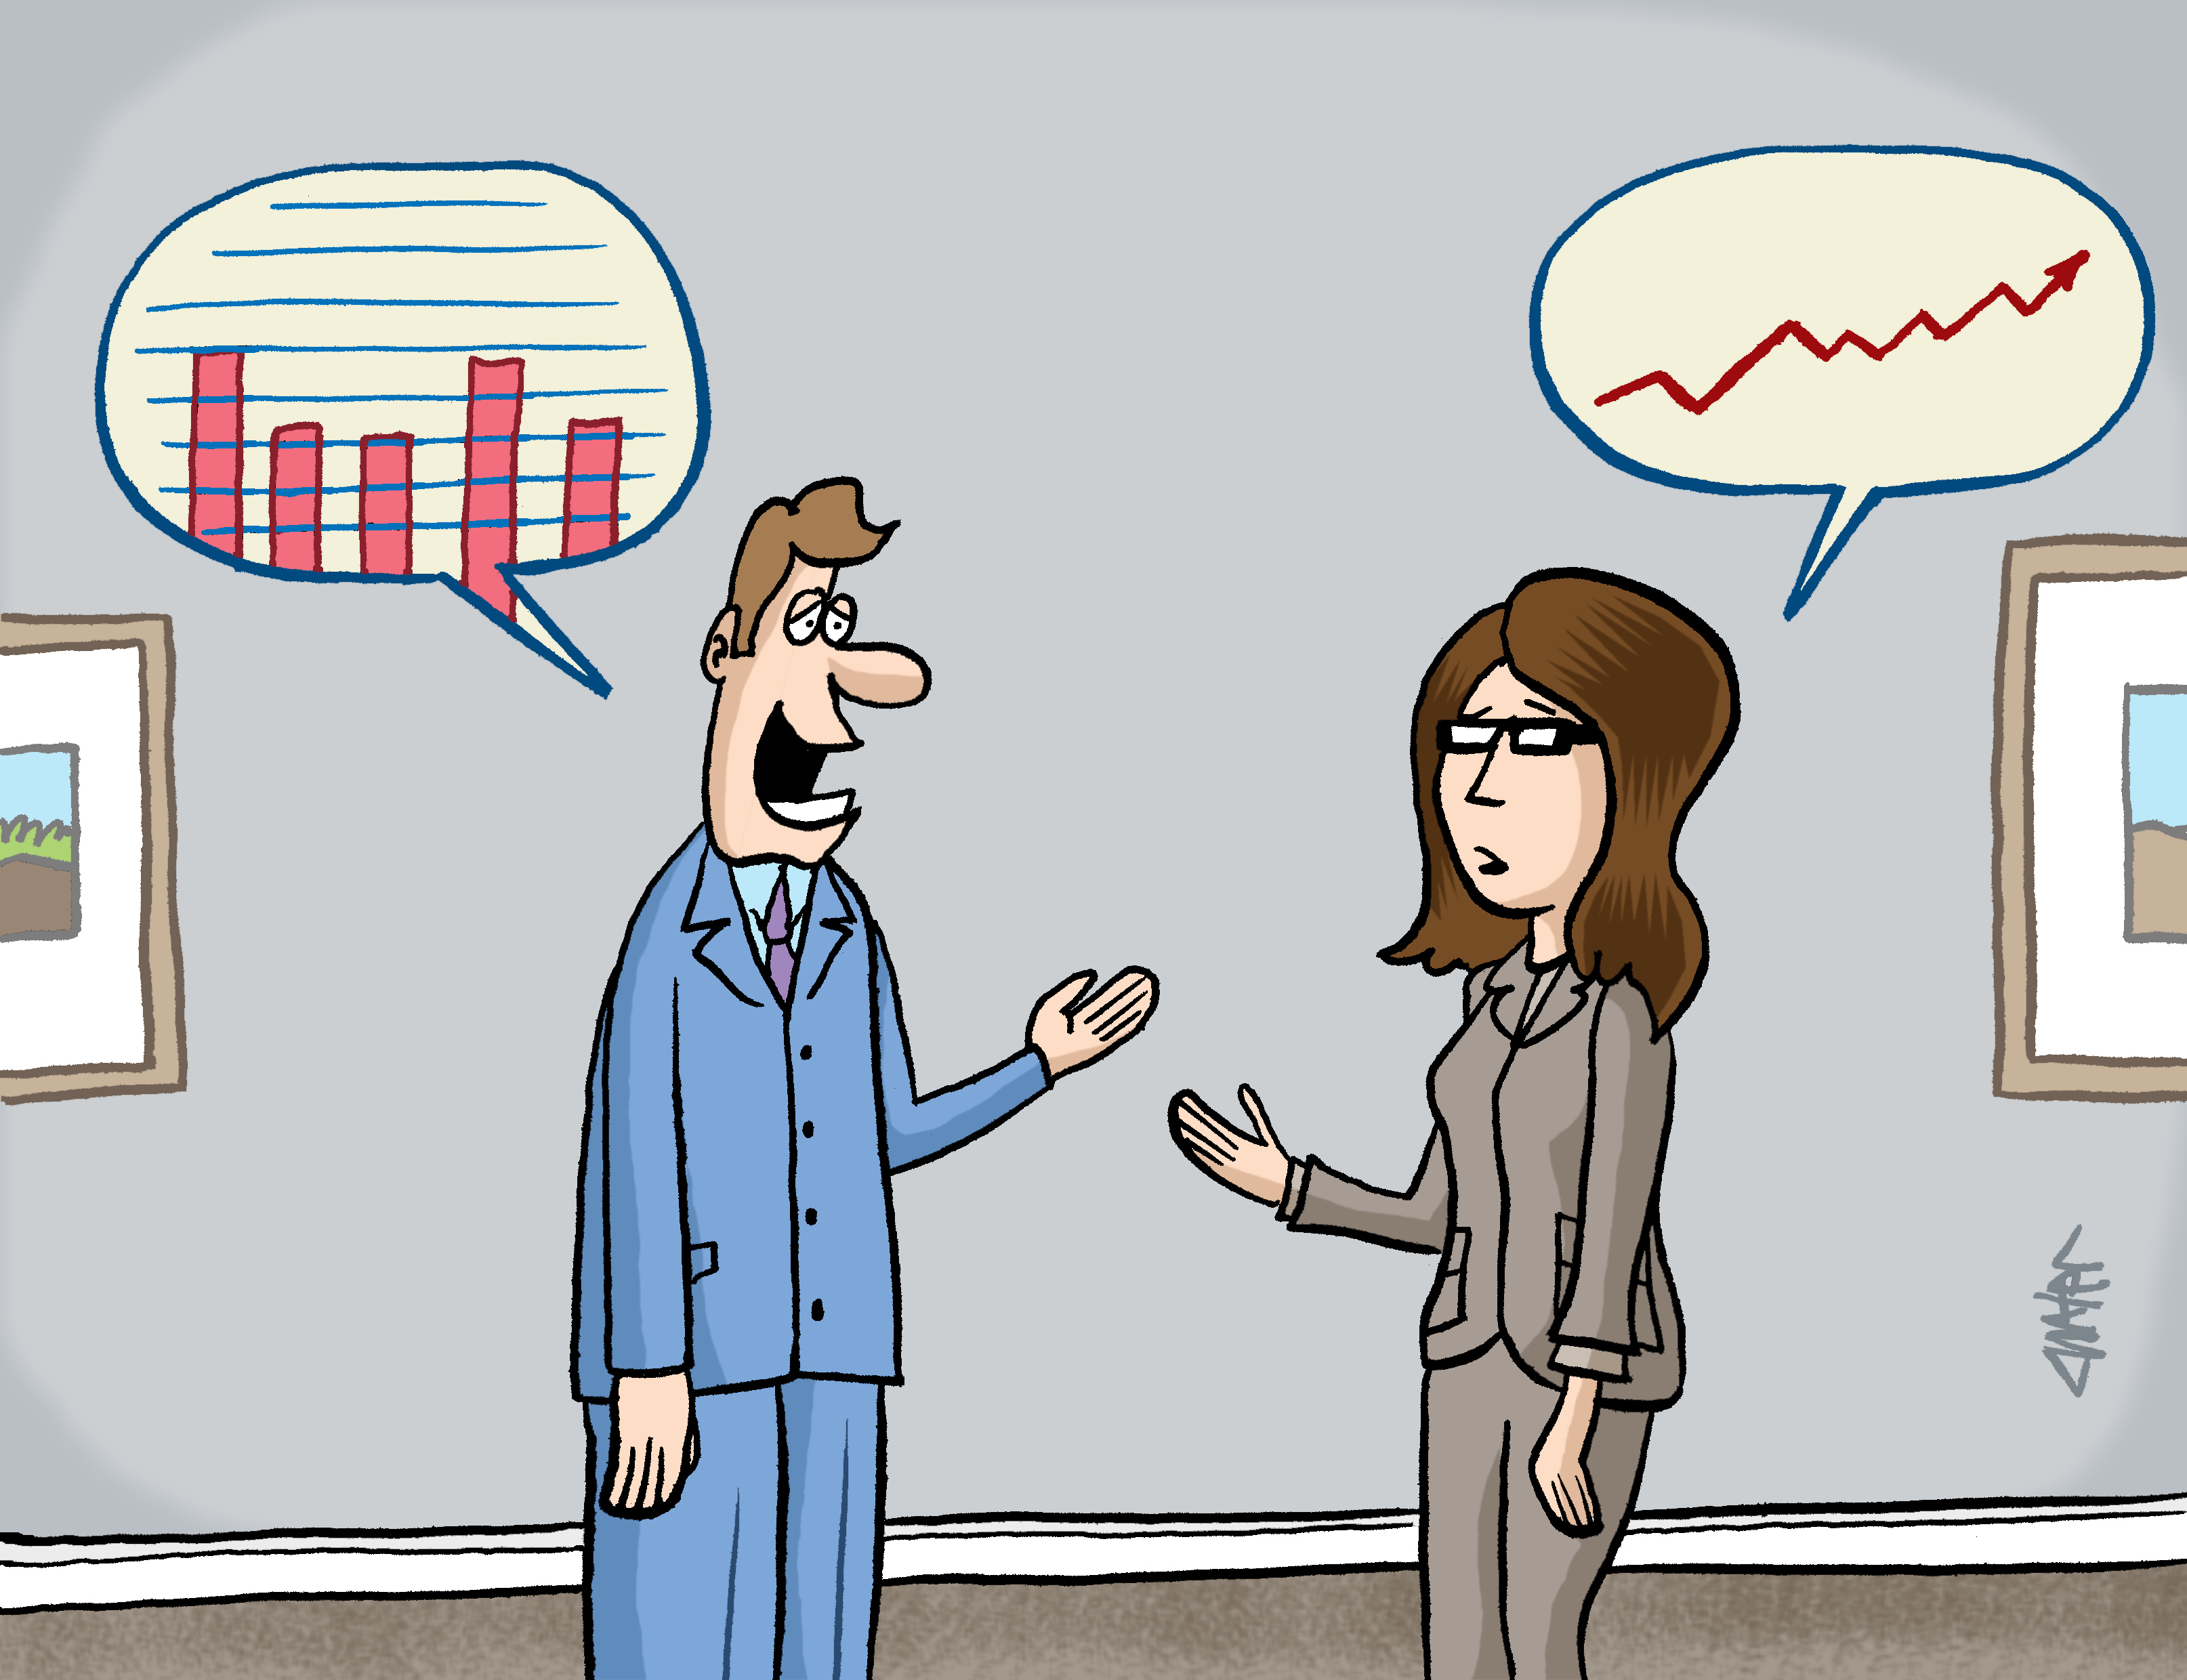 A cartoon with two people talking, but instead of words, graphs are coming out of their mouths